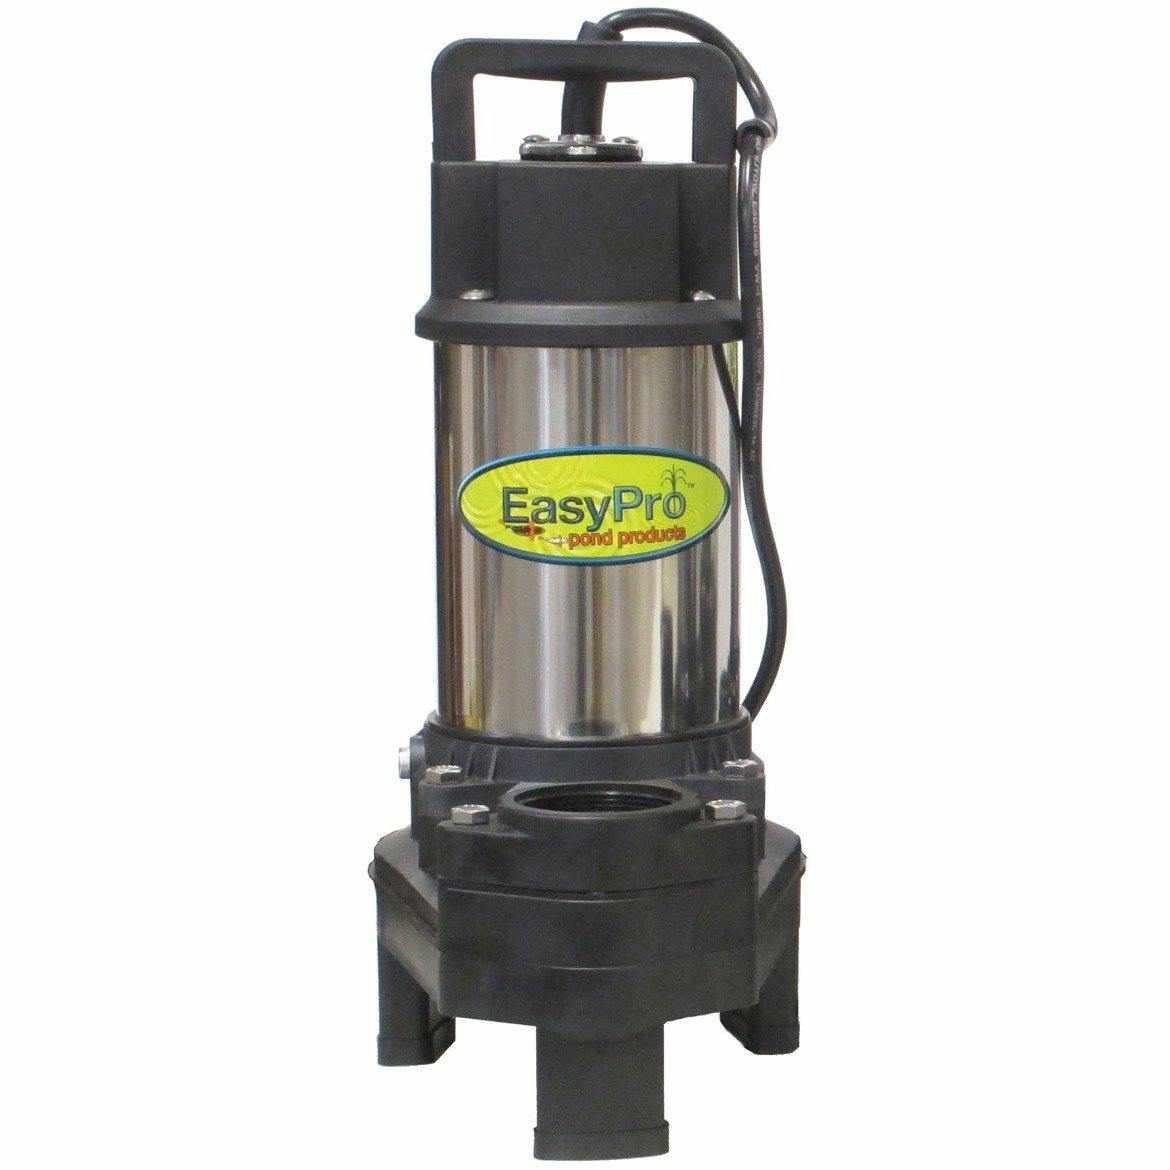 EasyPro TH Series Stainless Steel Submersible Pumps - Play It Koi